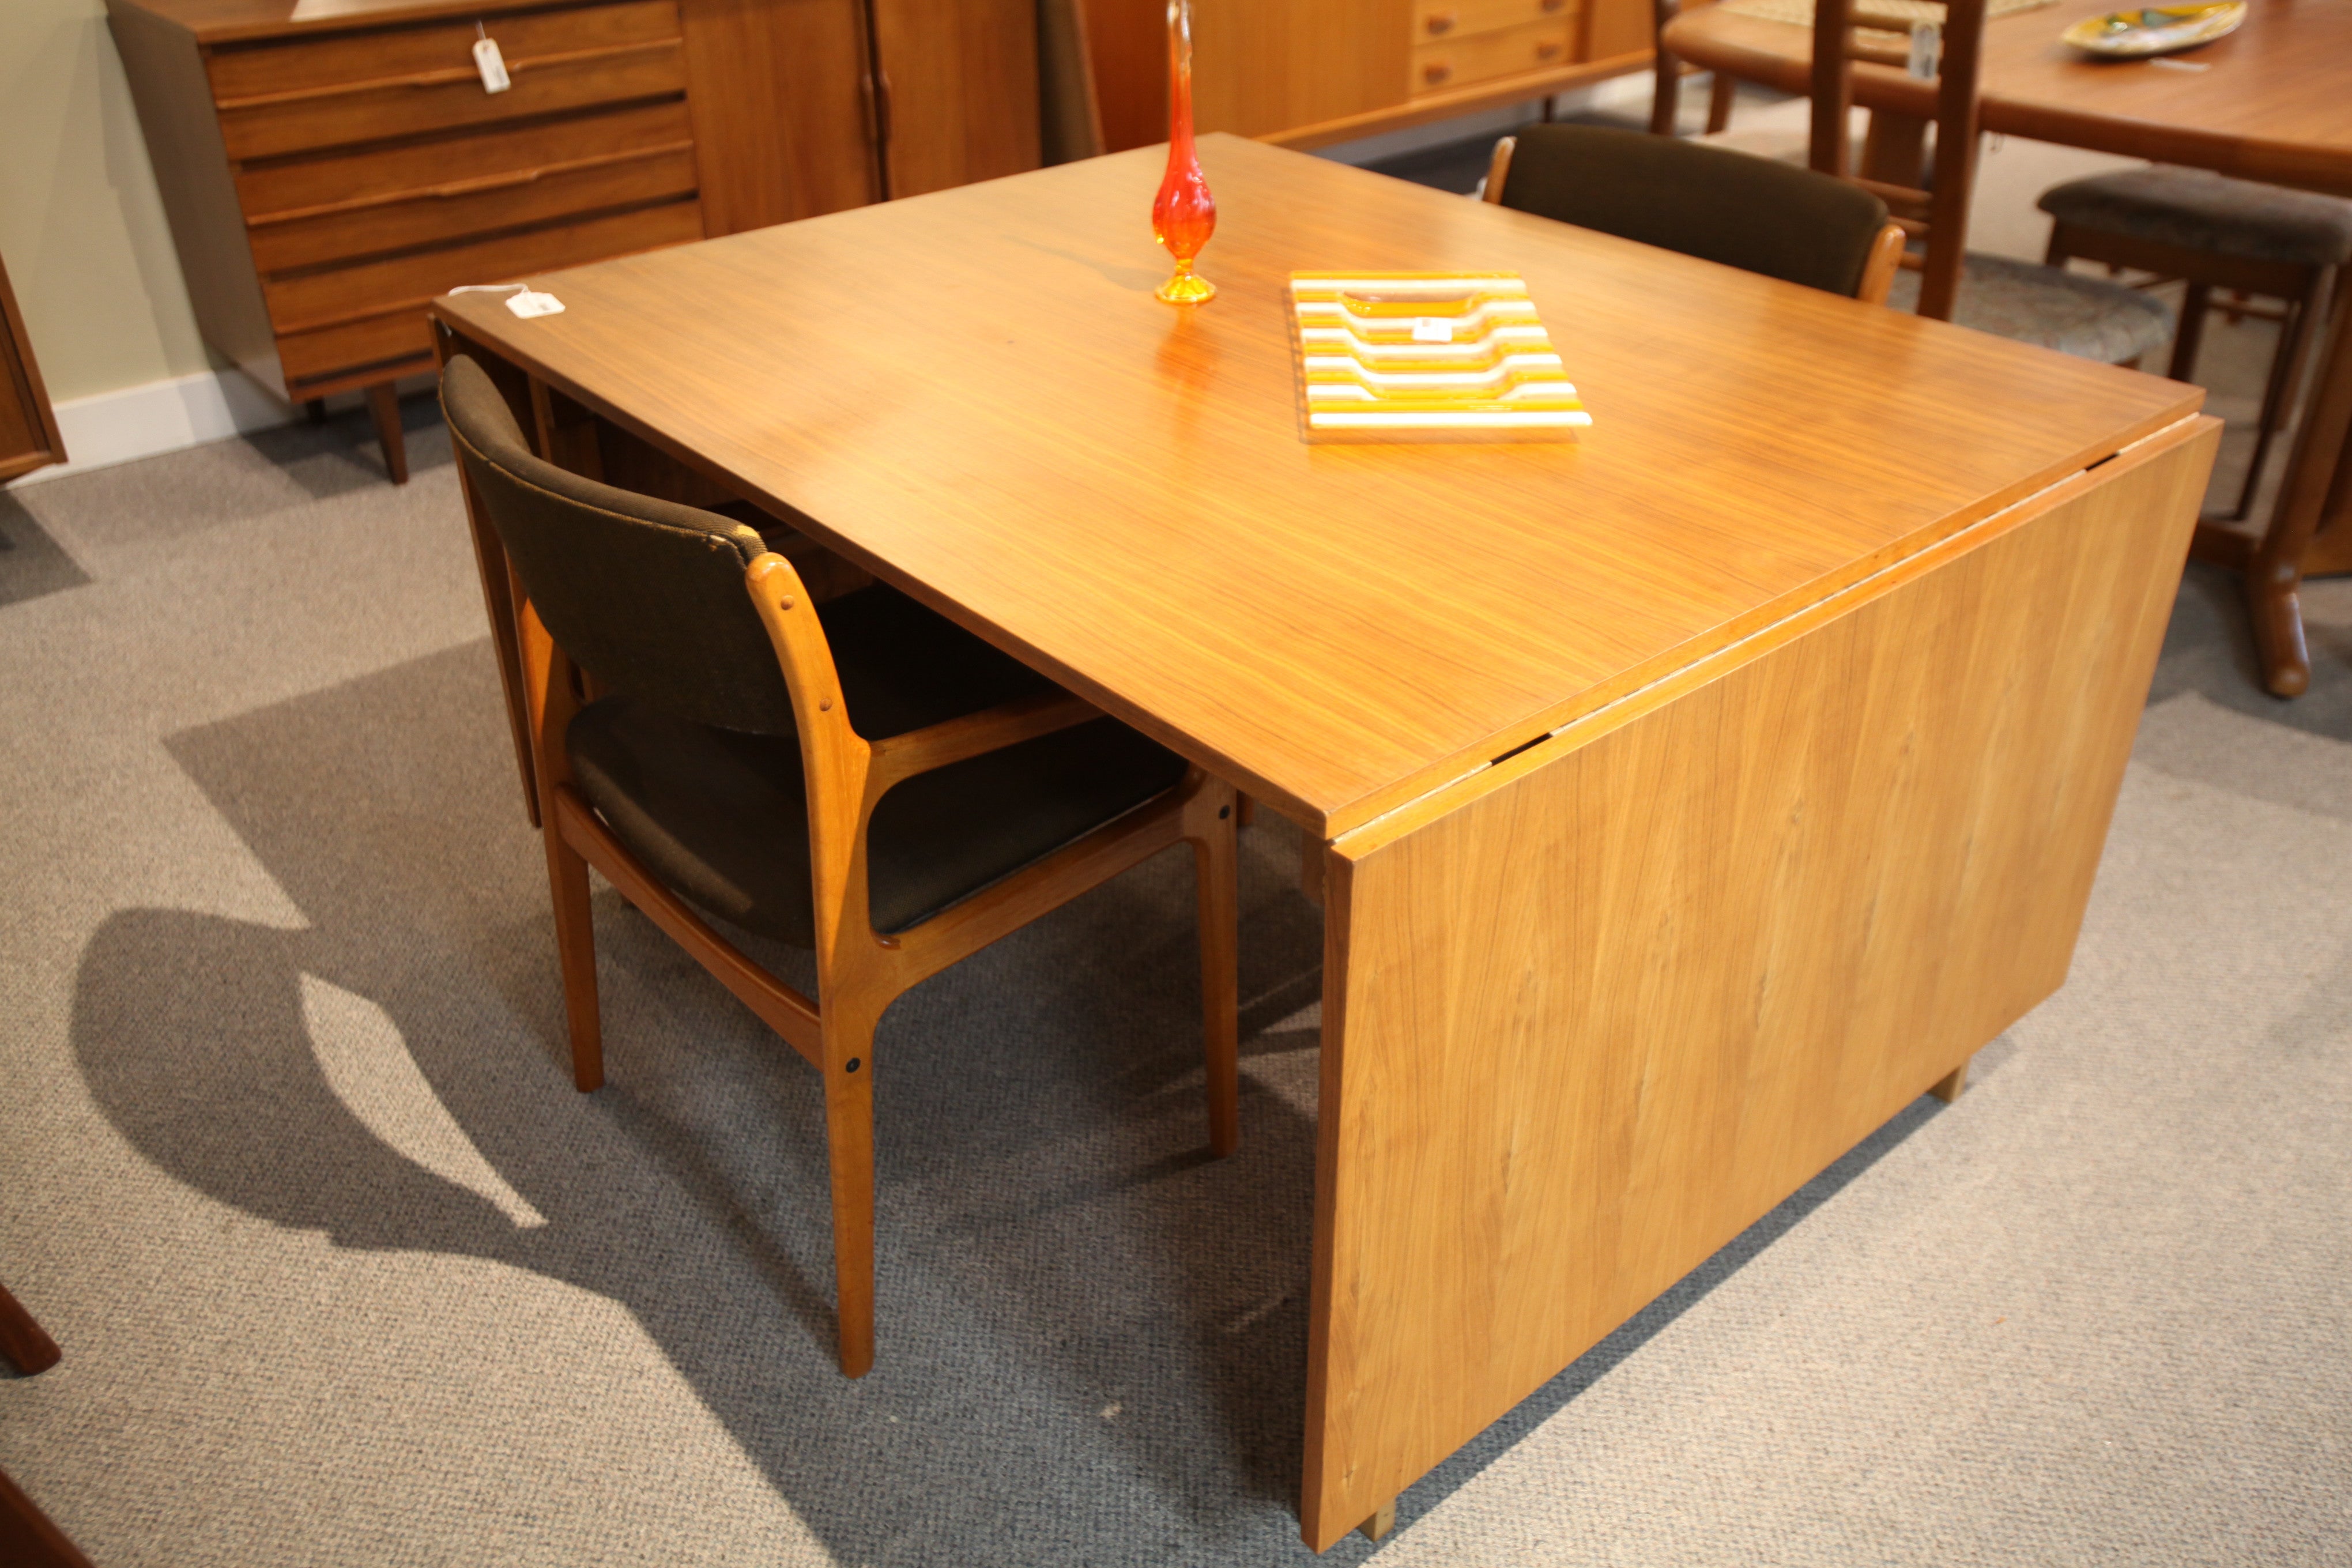 Teak Table with Drop Leafs Approx 1959 (95.5"x40") or (51"x40")